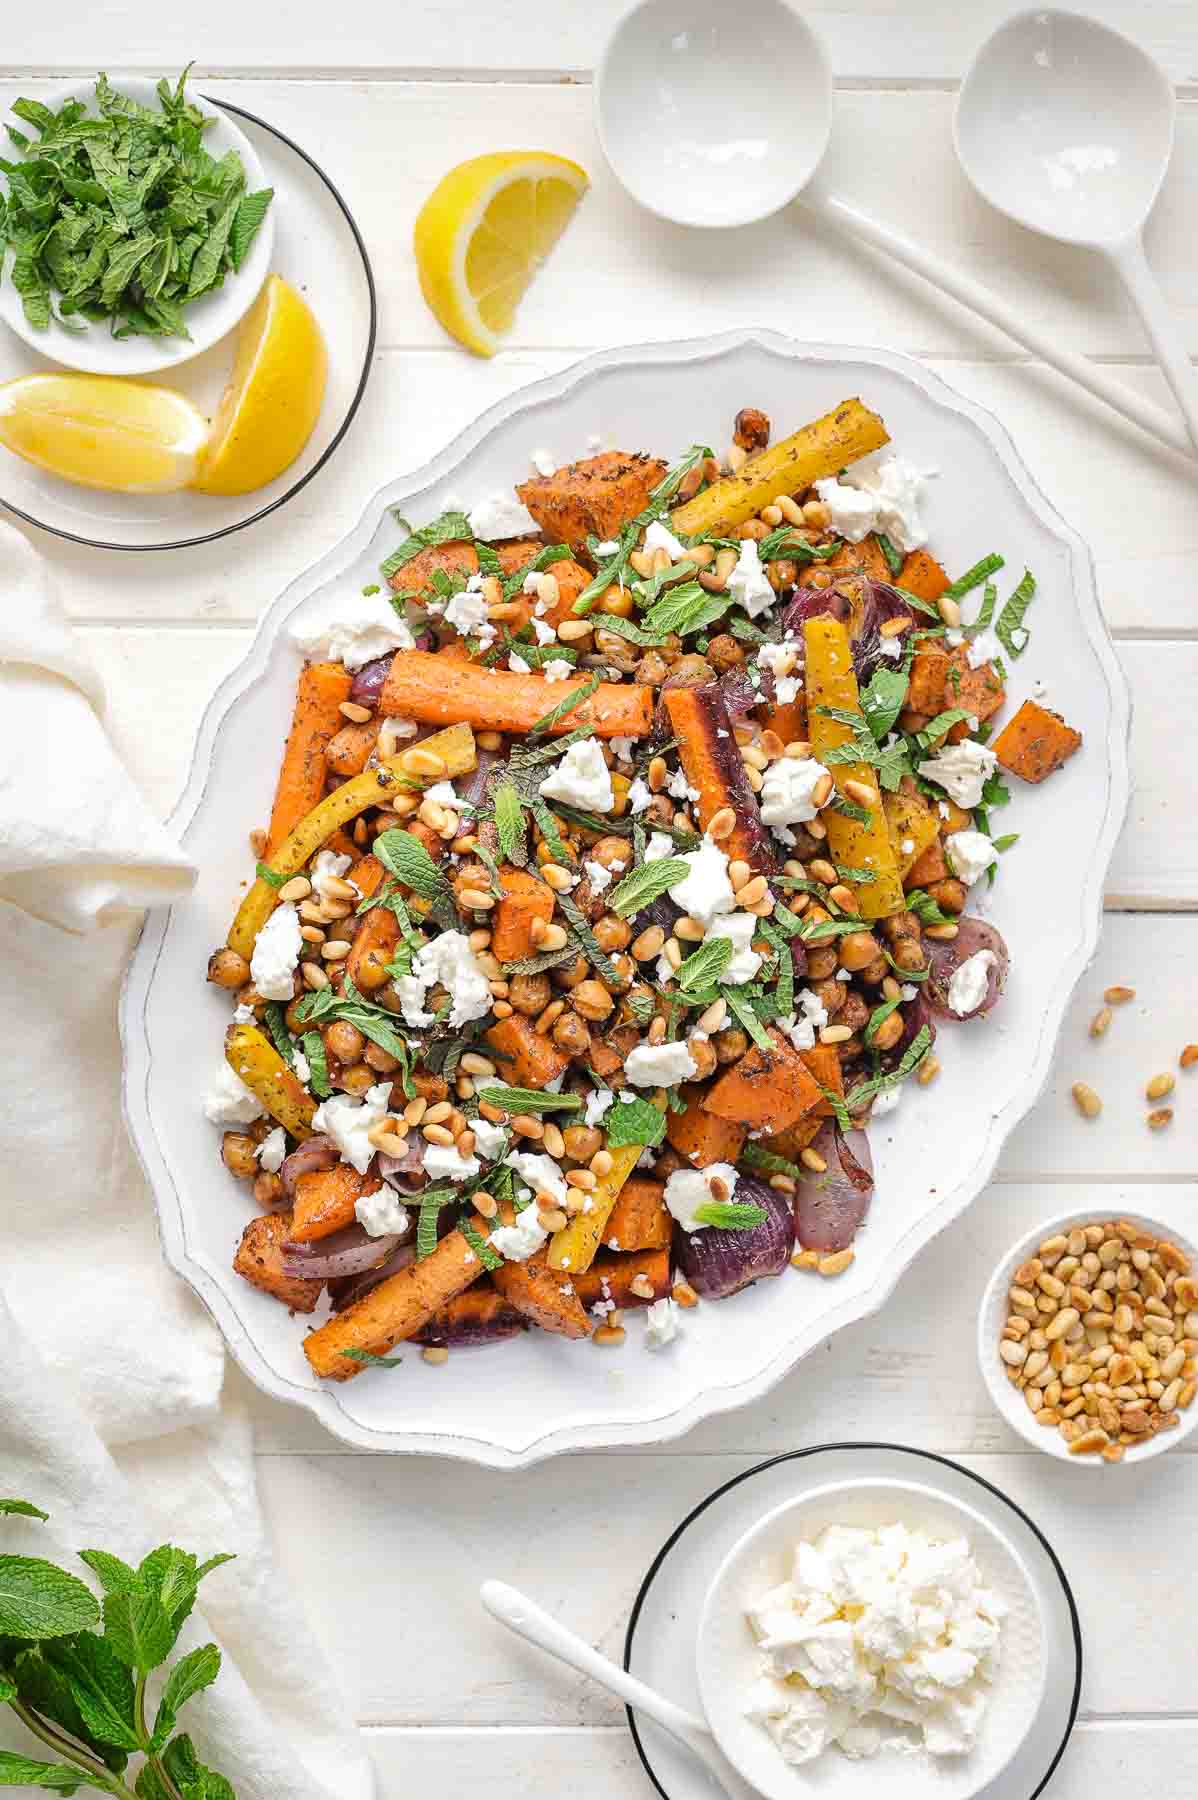 Roasted Vegetable and Chickpeas with Za’atar, Mint and Feta